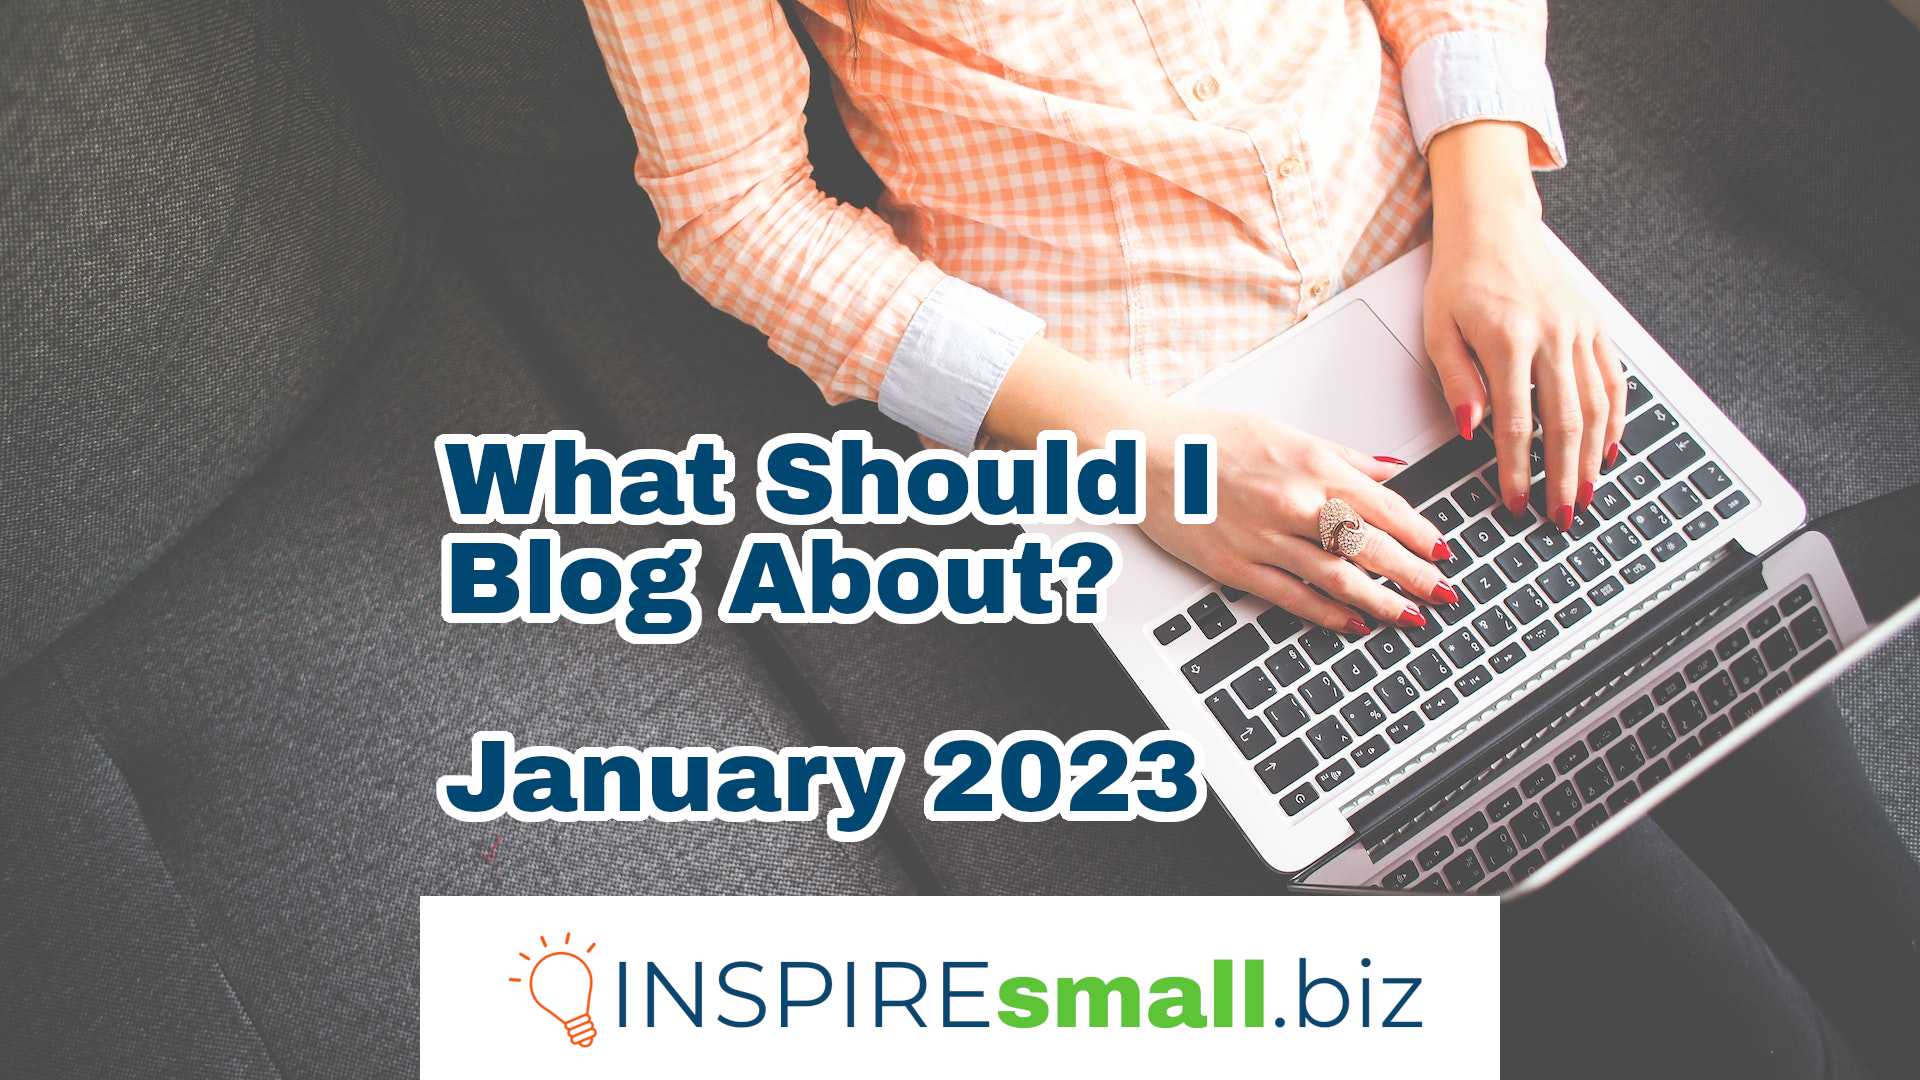 A person sitting on a gray couch in an orange patterned shirt with a laptop. Overlayed text reads What Should I Blog About? January 2023, from INSPIREsmall.biz